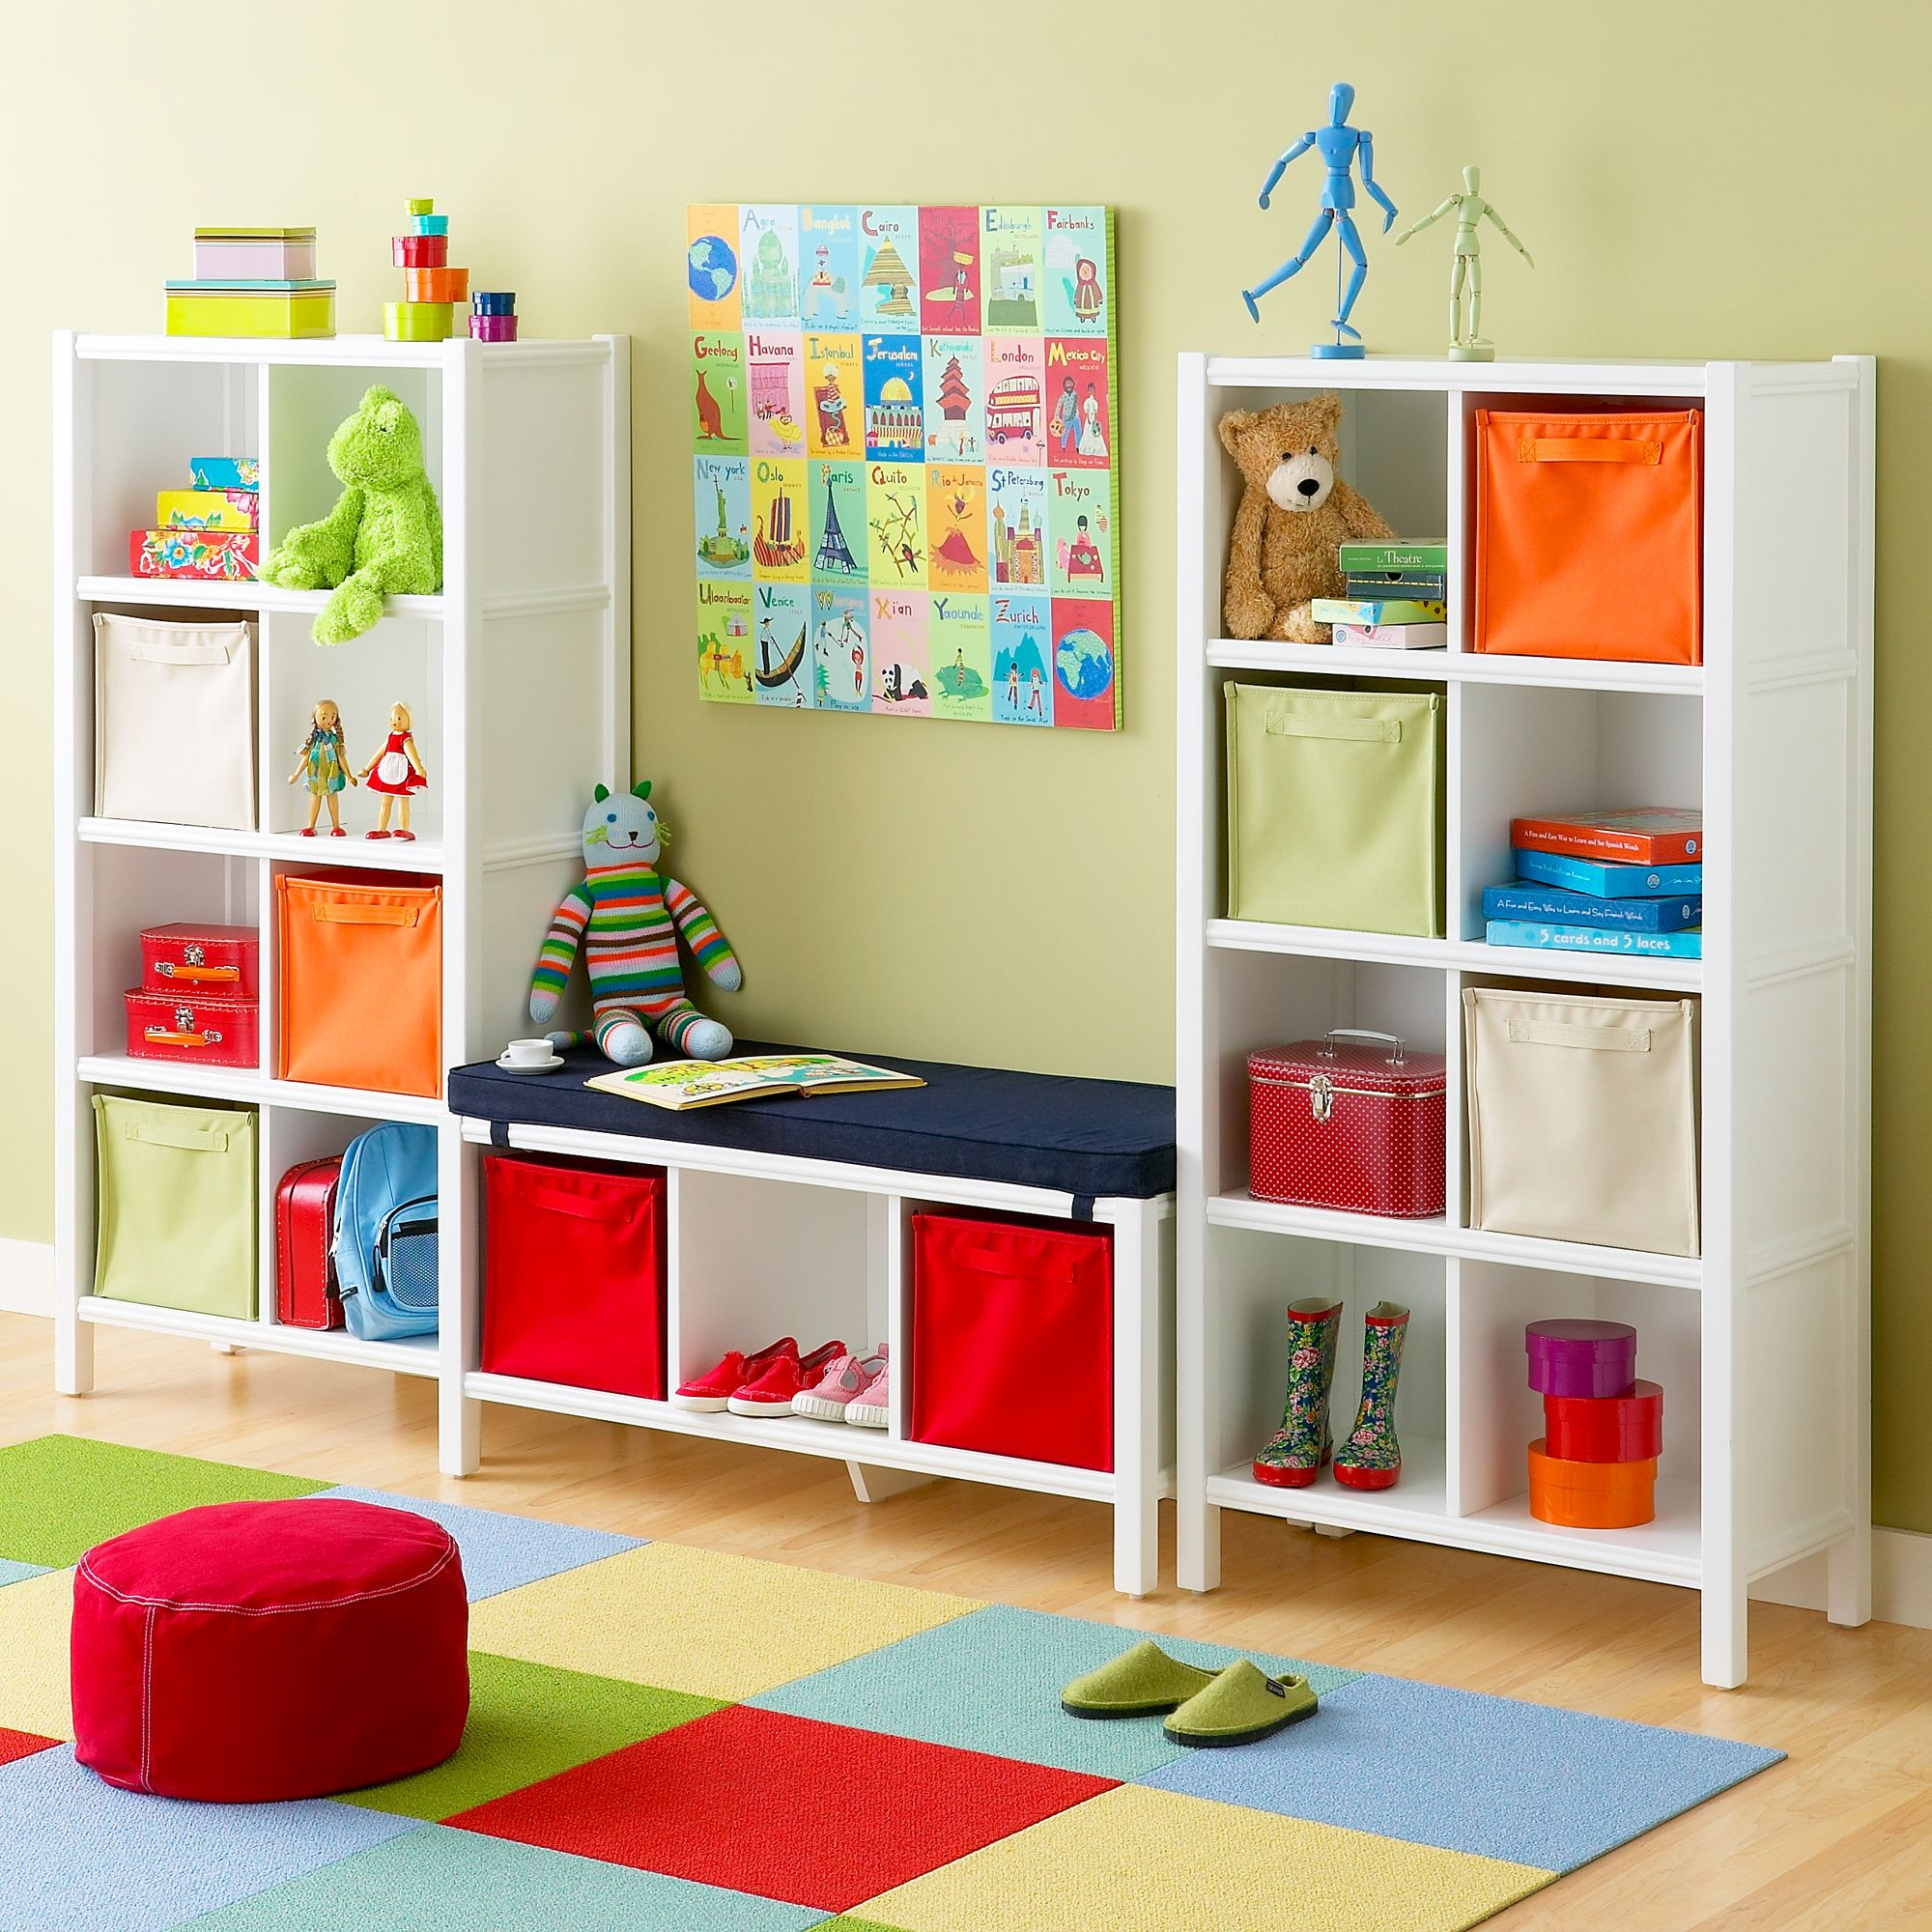 Kids Room Shelving
 25 Exceptional Toddler Boy Room Ideas SloDive